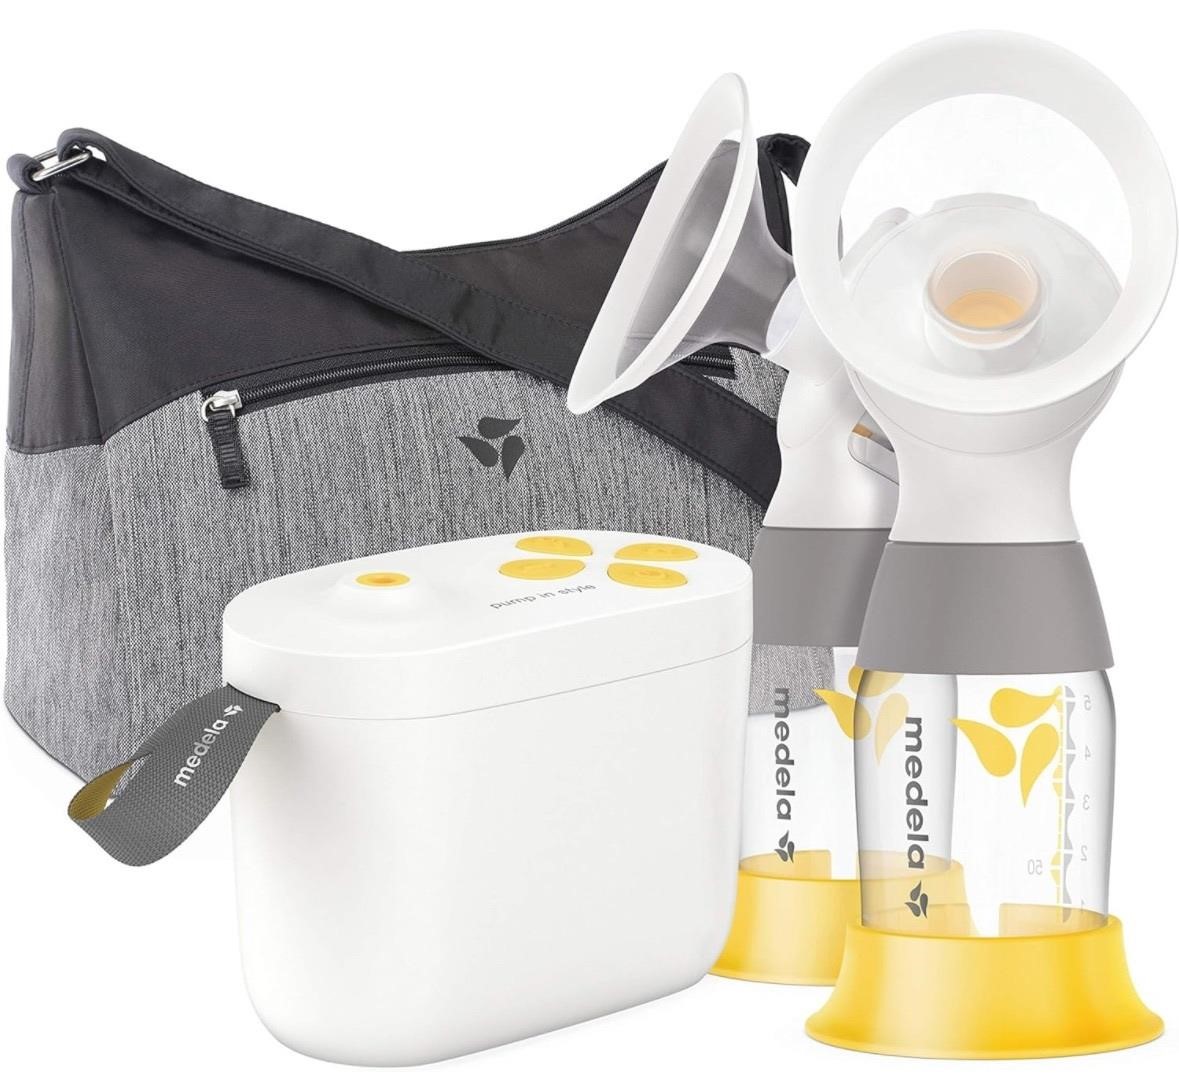 NEW $300 Portable Double Electric Breast Pump